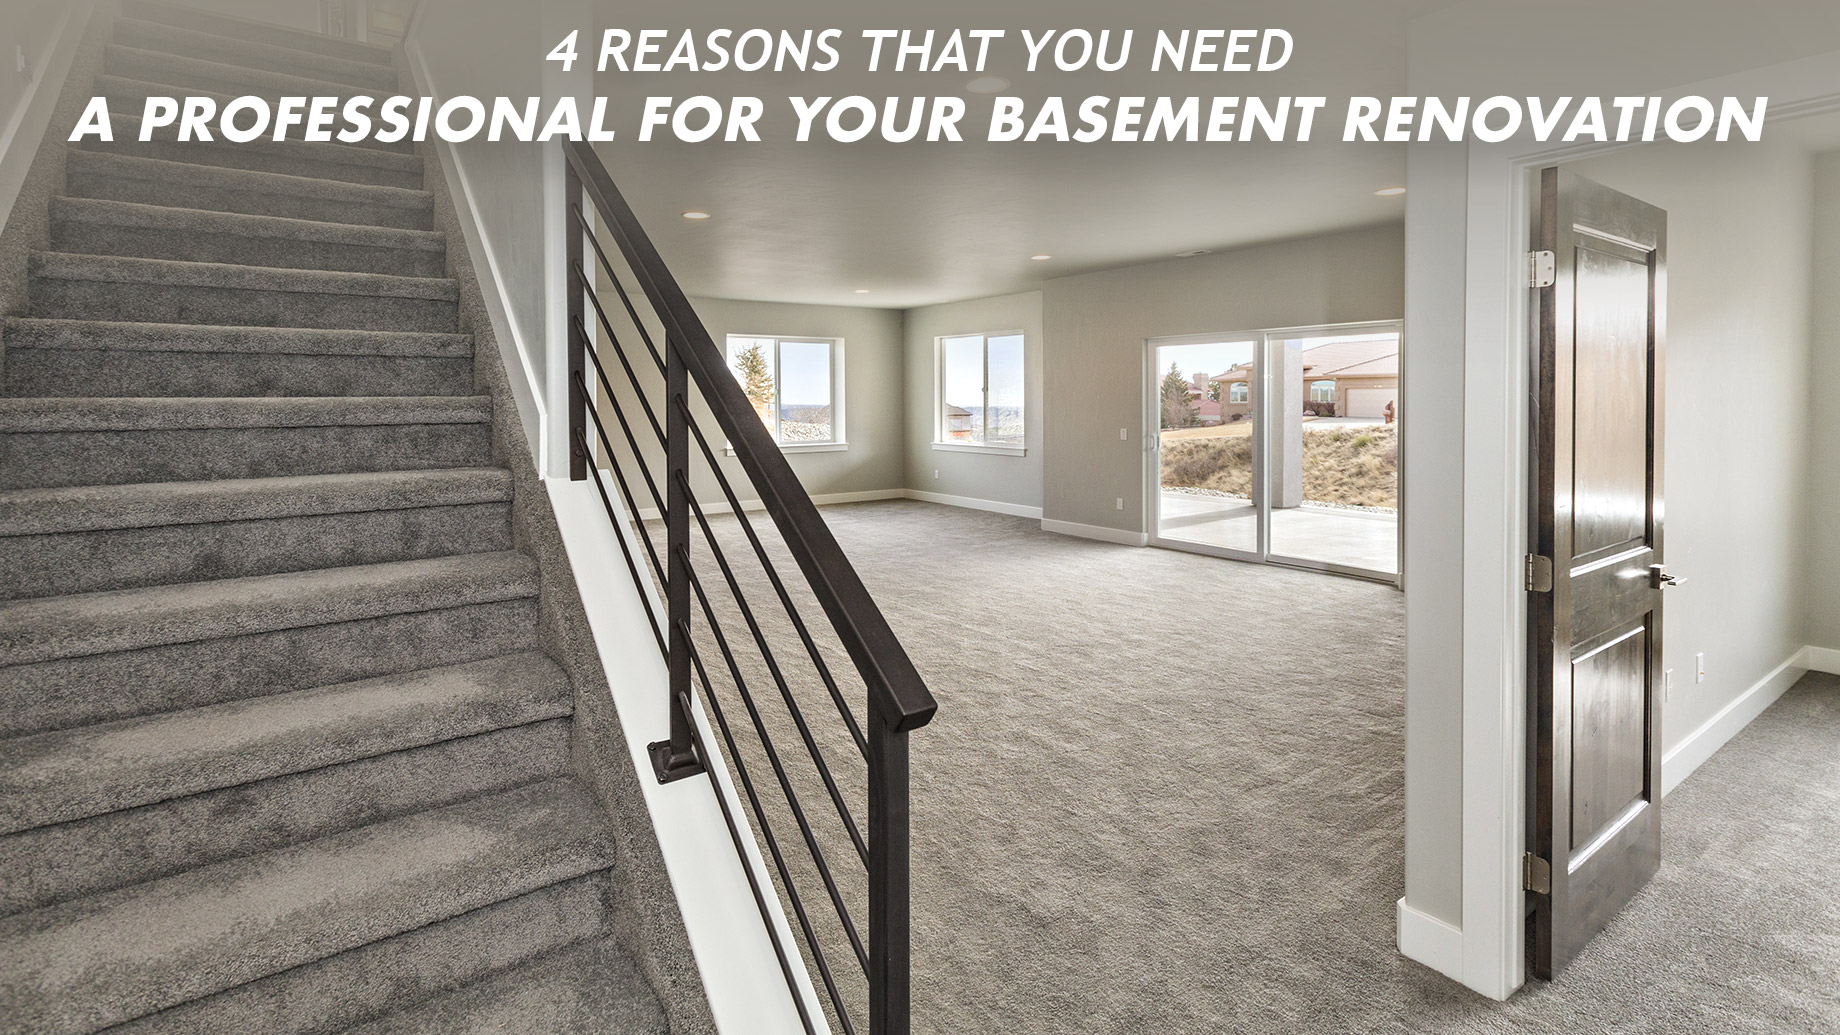 4 Reasons That You Need a Professional for Your Basement Renovation